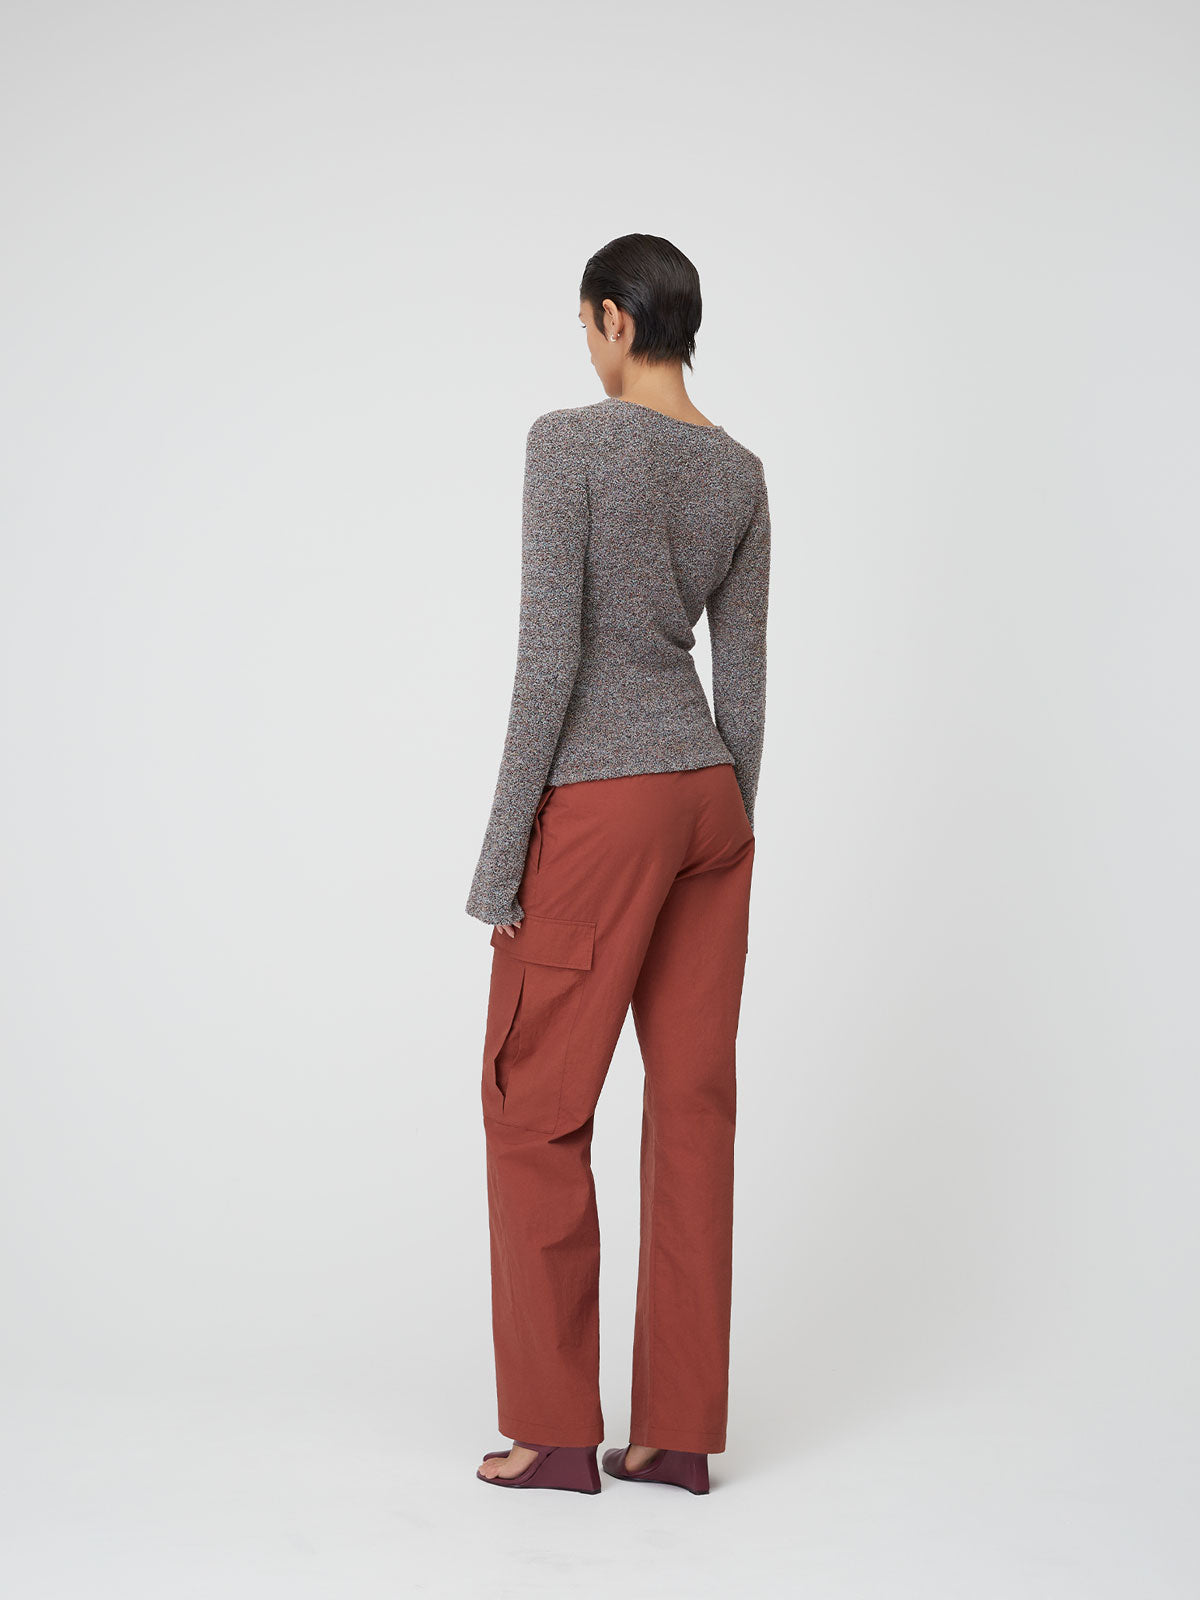 Back view of a female figure wearing the Mixed Berry 09 Knubby Fitted Jumper